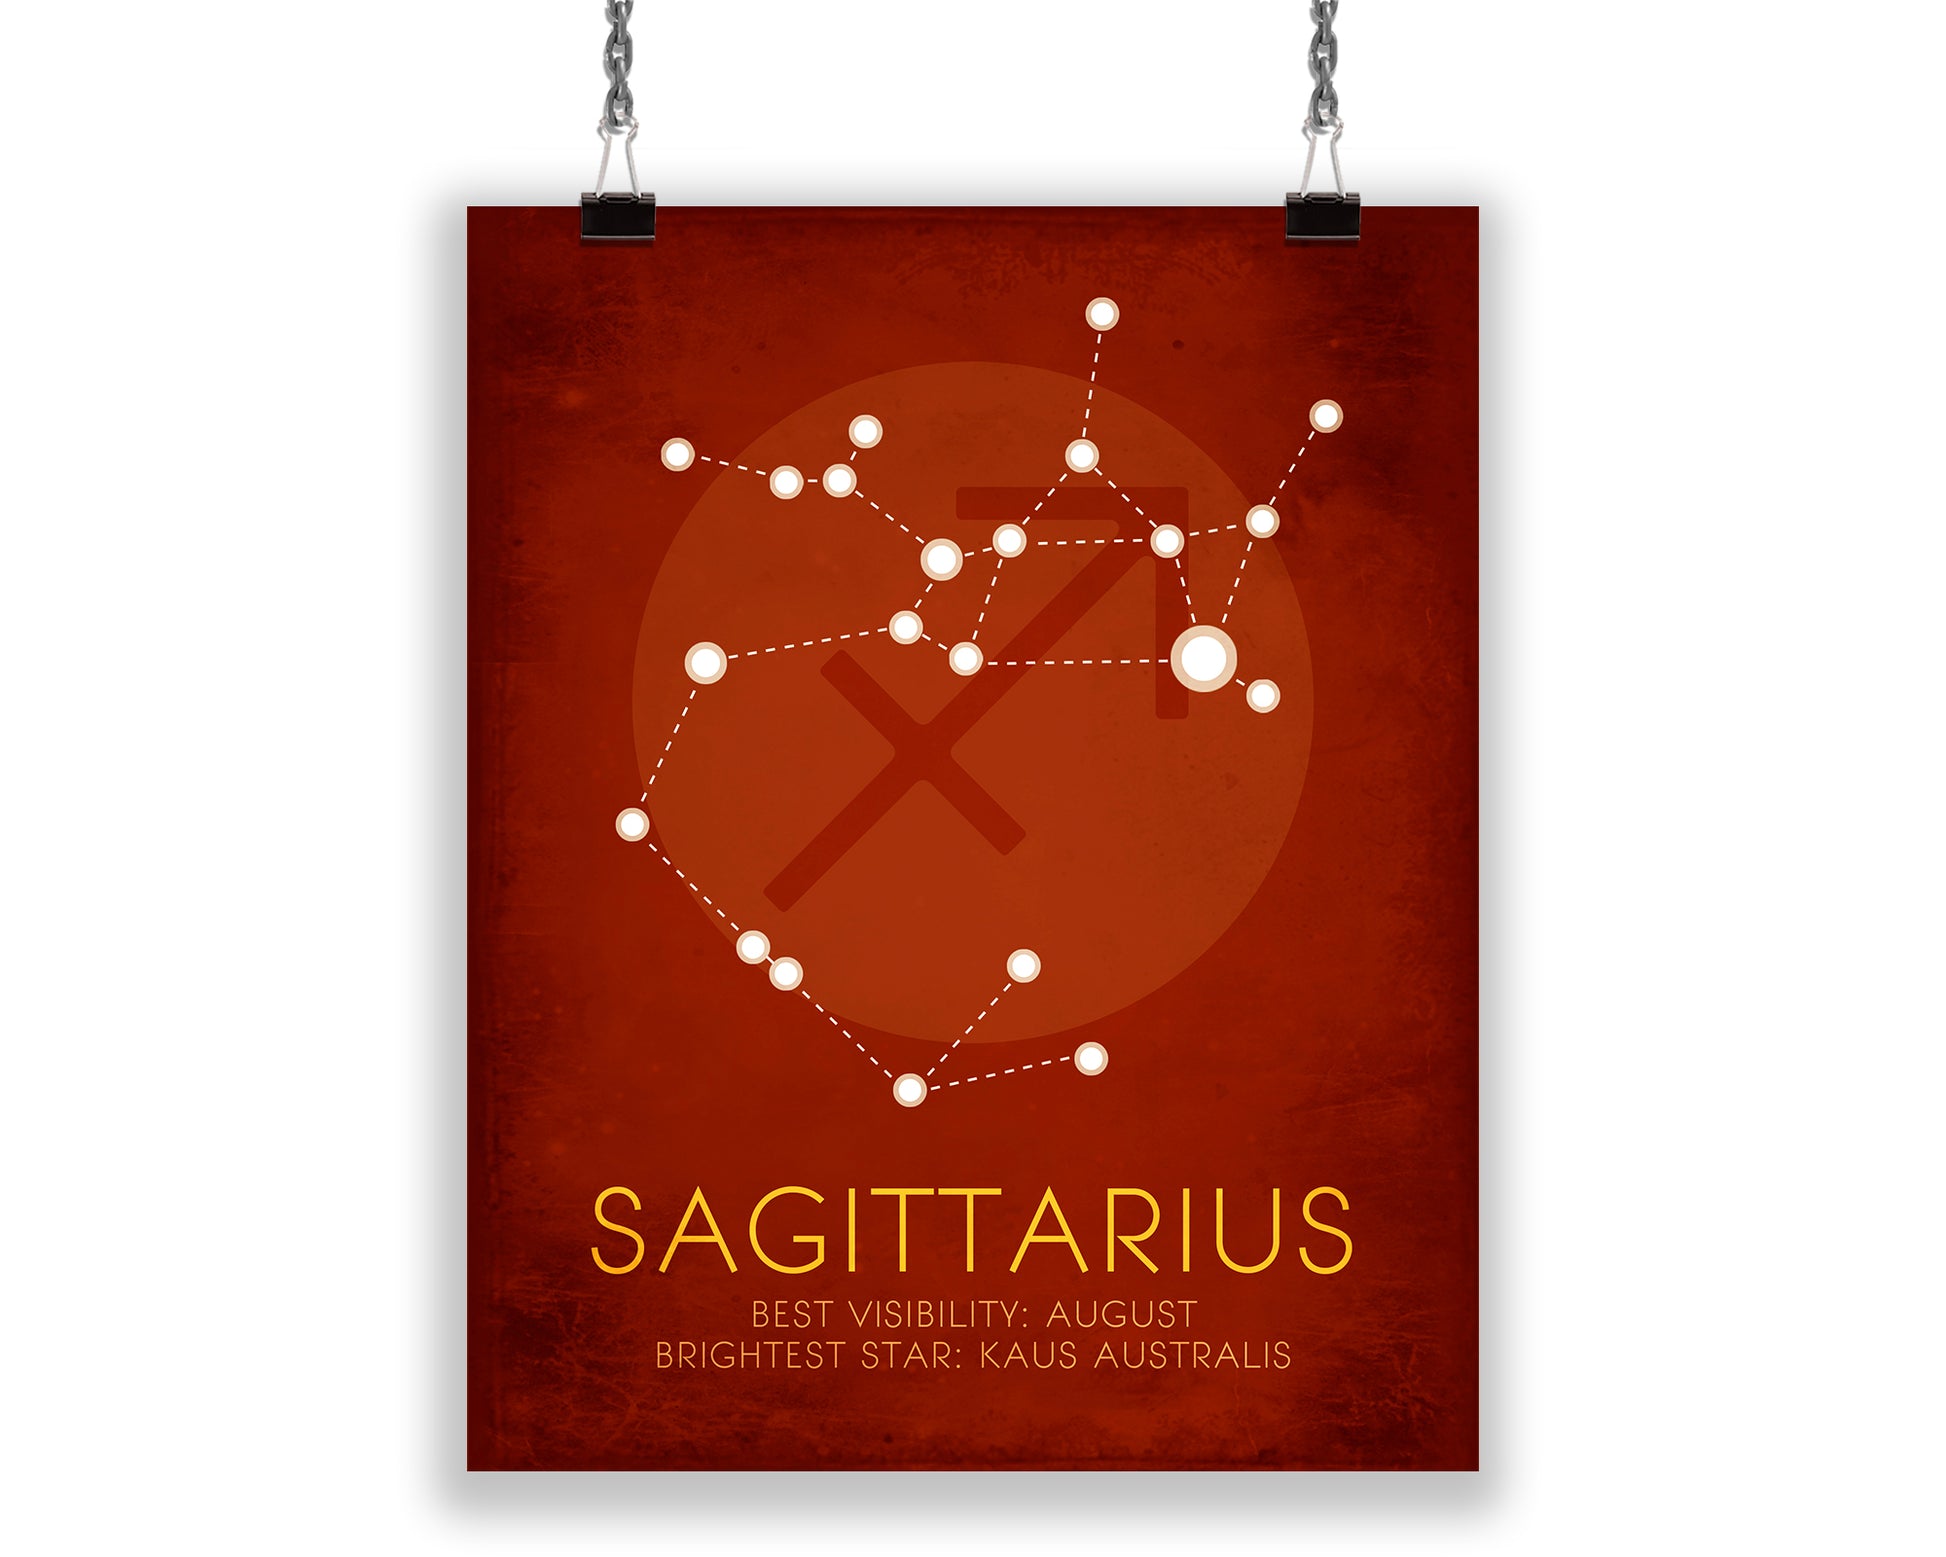 A Sagittarius zodiac constellation art prints with a vibrant red color palette in a minimalist style. The print also lists the optimal month for viewing as well as the constellations brightest star.